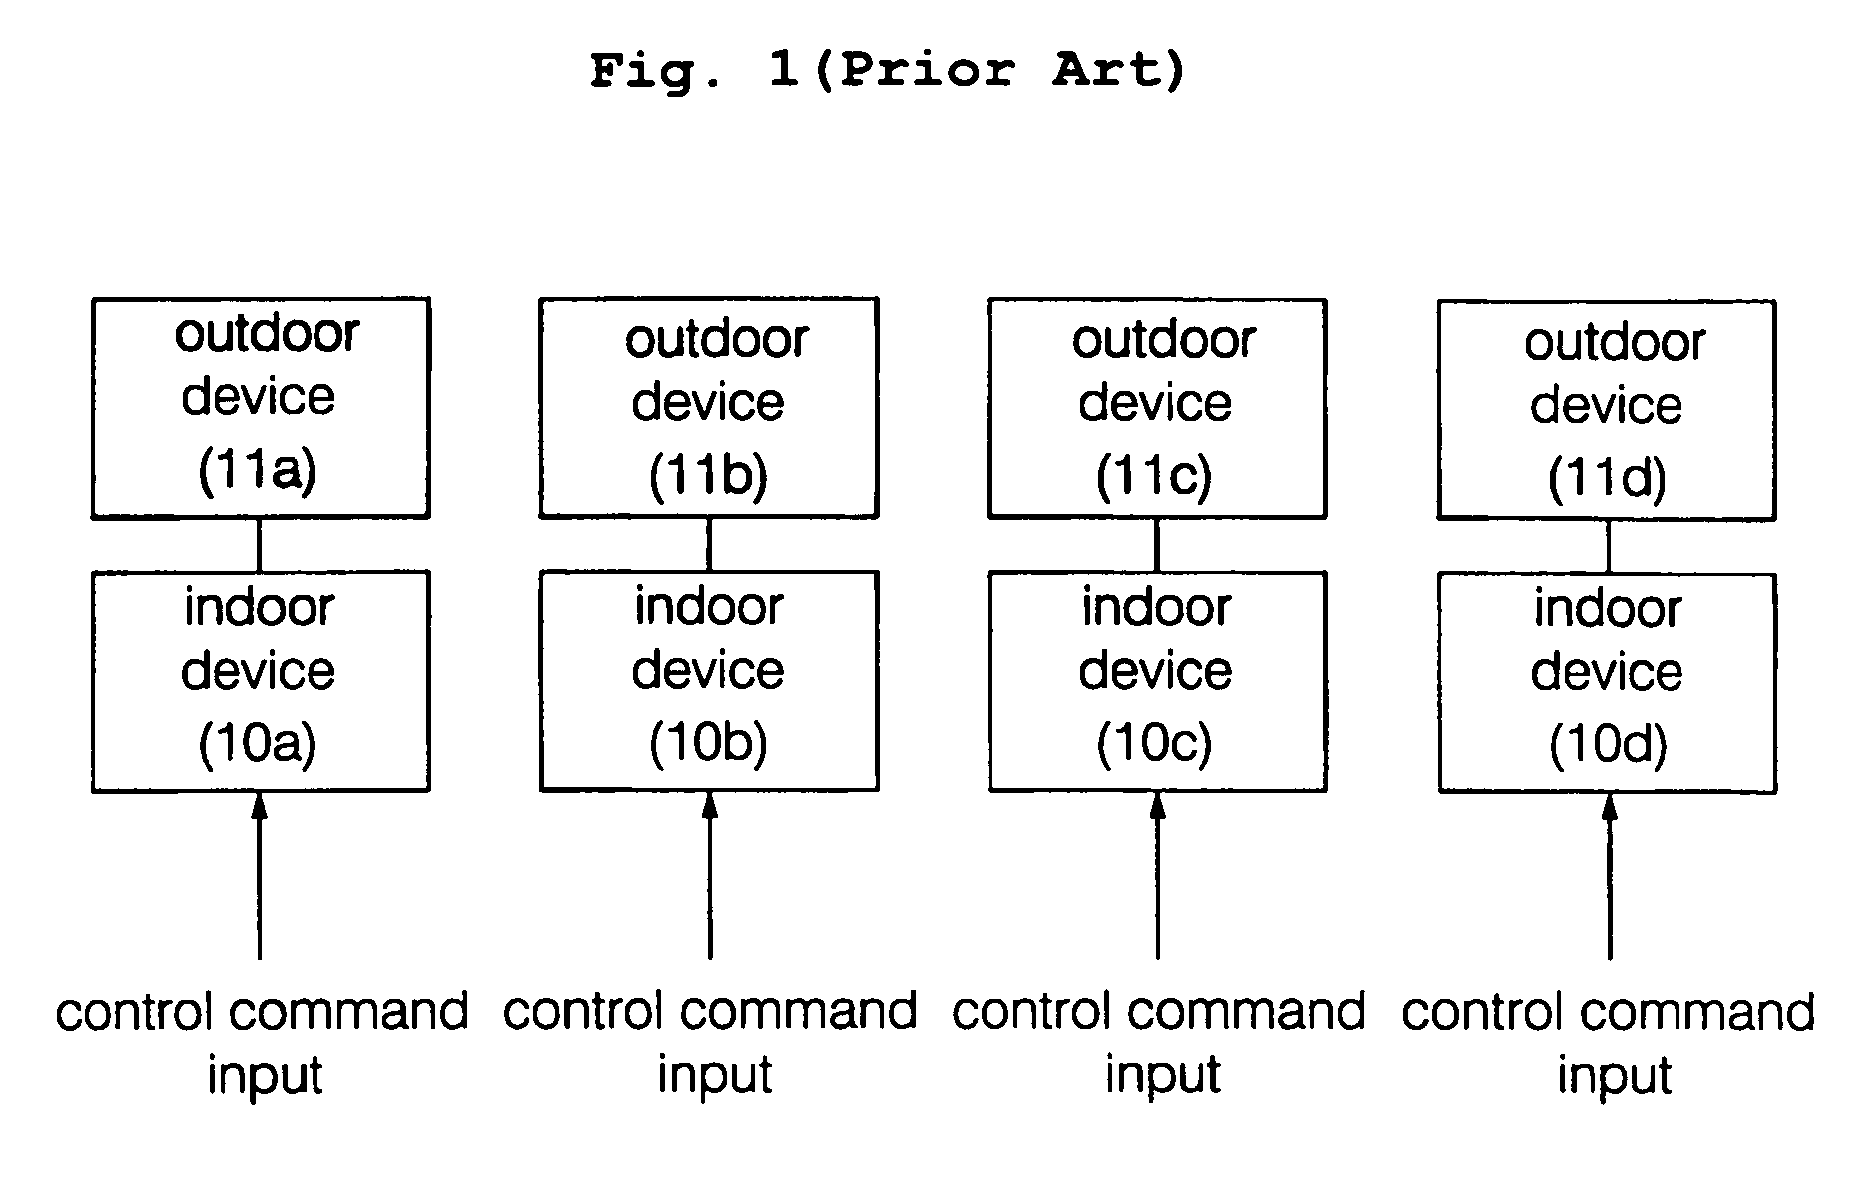 Central control system and method for controlling air conditioners